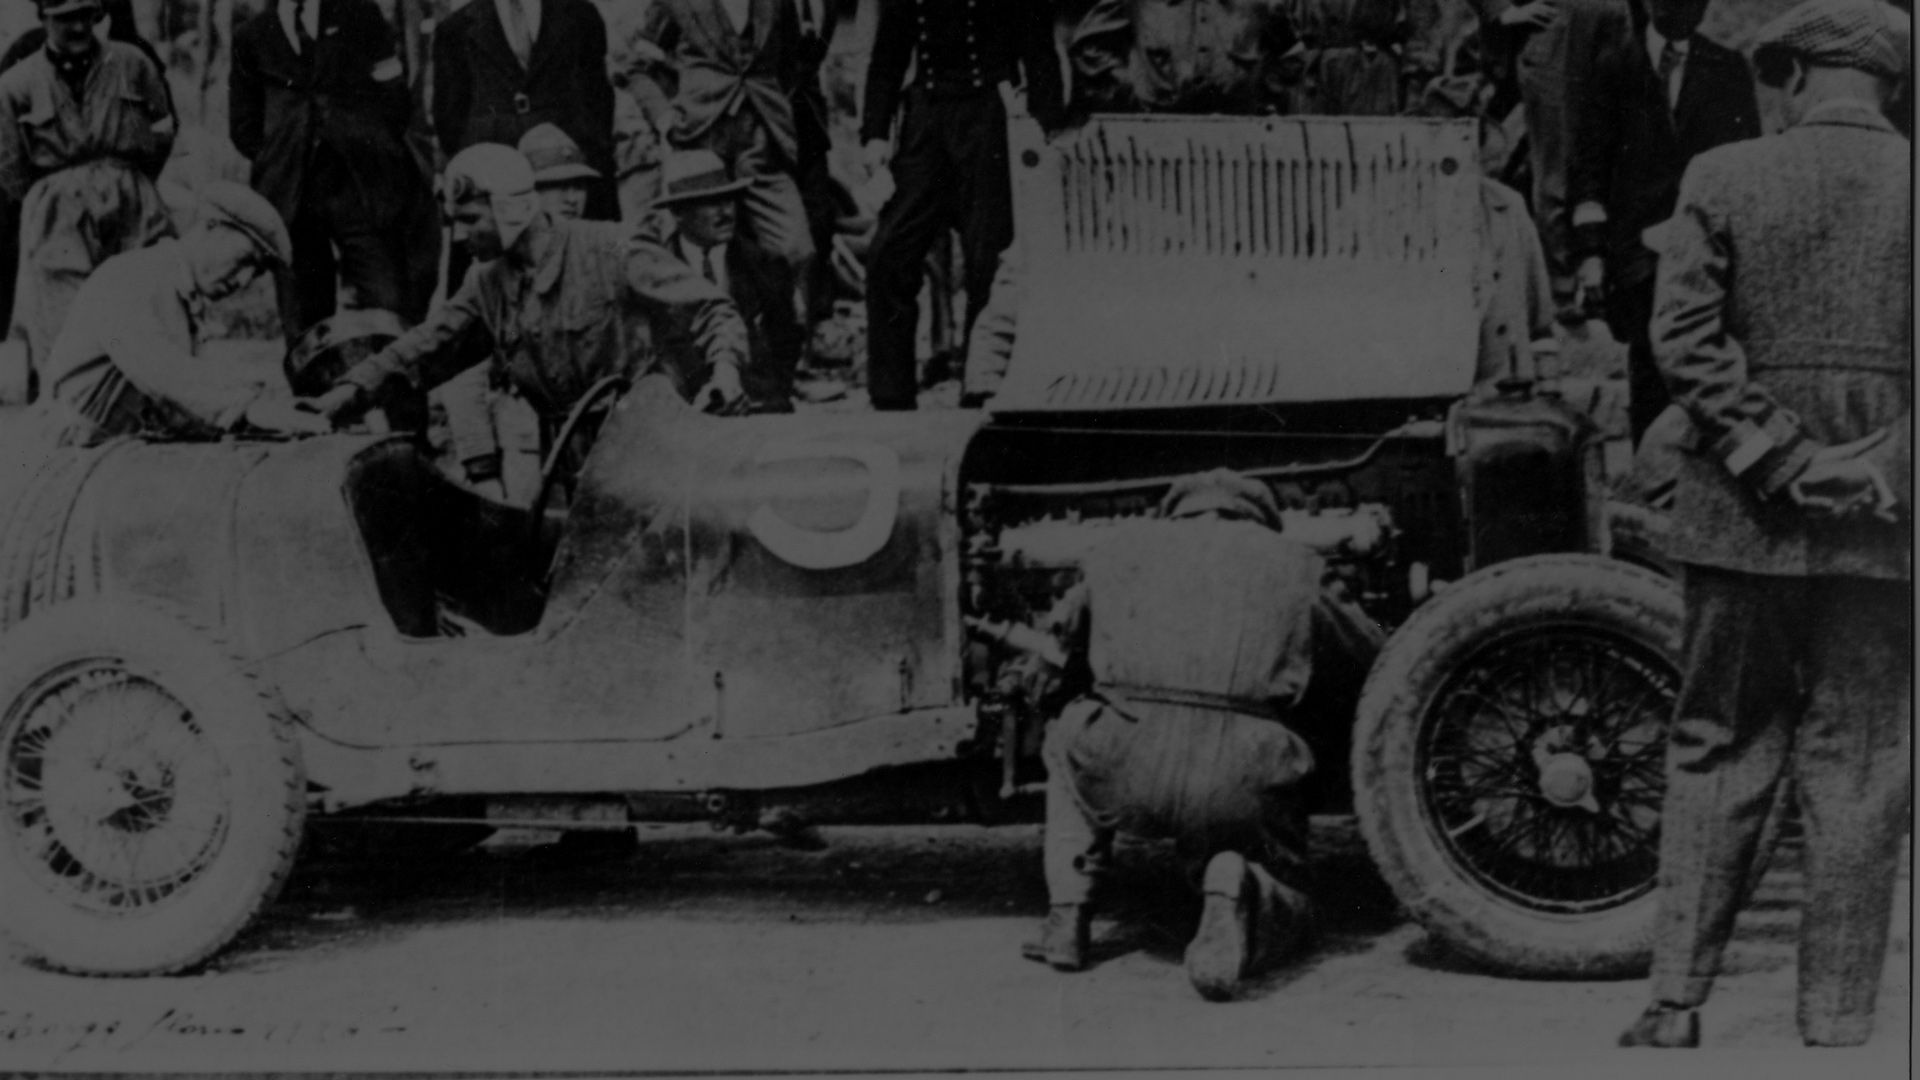 Black and white picture of first Maserati badged car in 1926